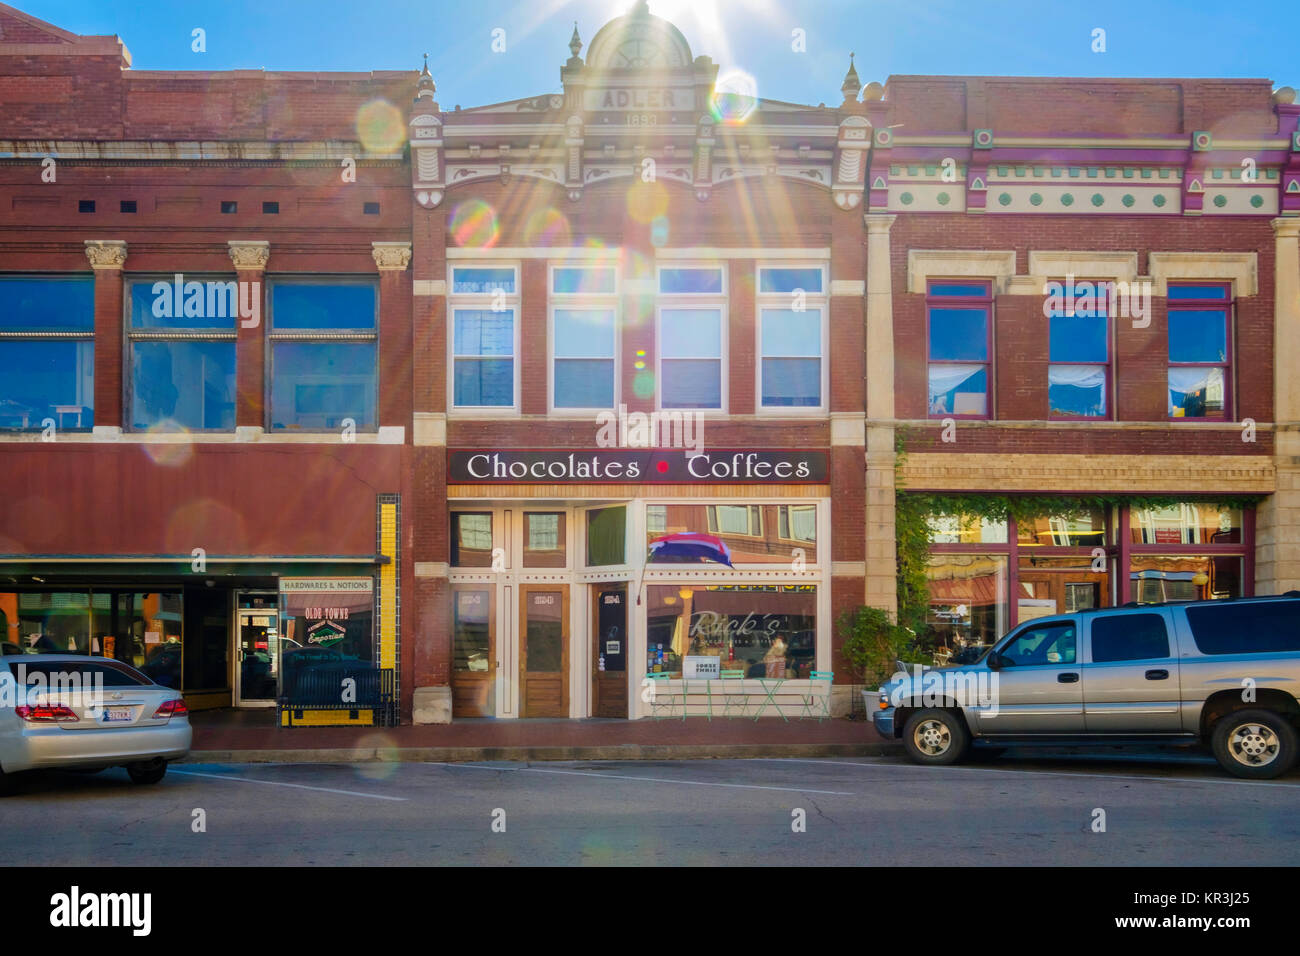 Dave's Chocolates & Coffees, a shop in the historic district of Guthrie, Oklahoma, USA. Sun flare. Stock Photo